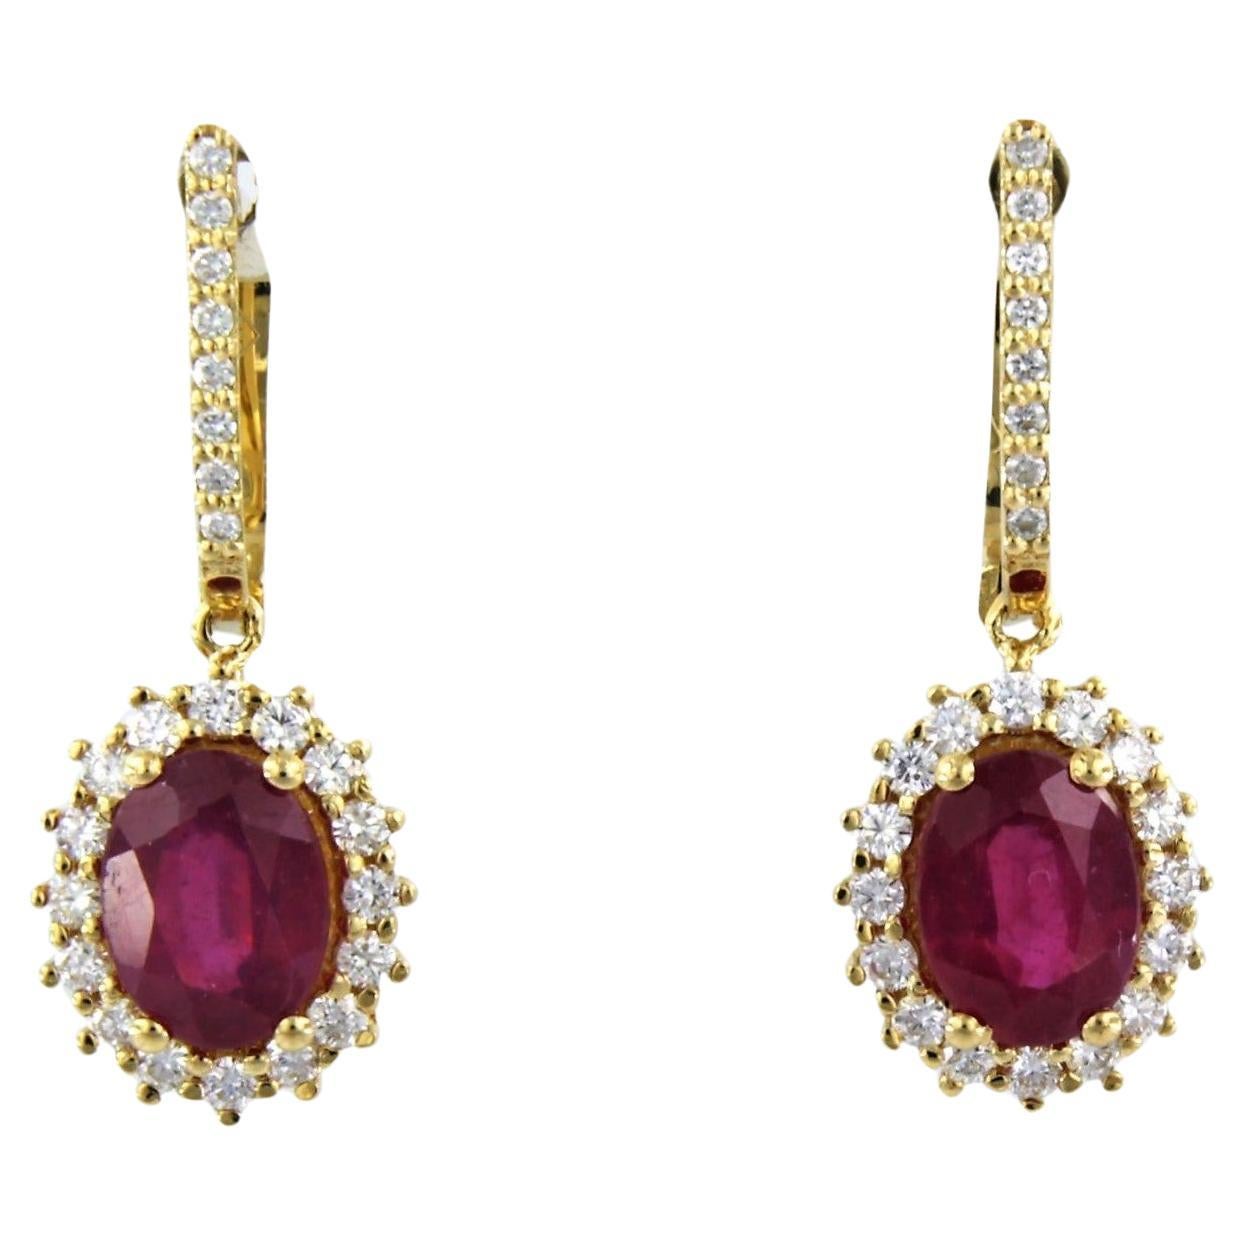 18k gold earrings with ruby to. 3.40ct and brilliant cut diamonds up to.0.64ct